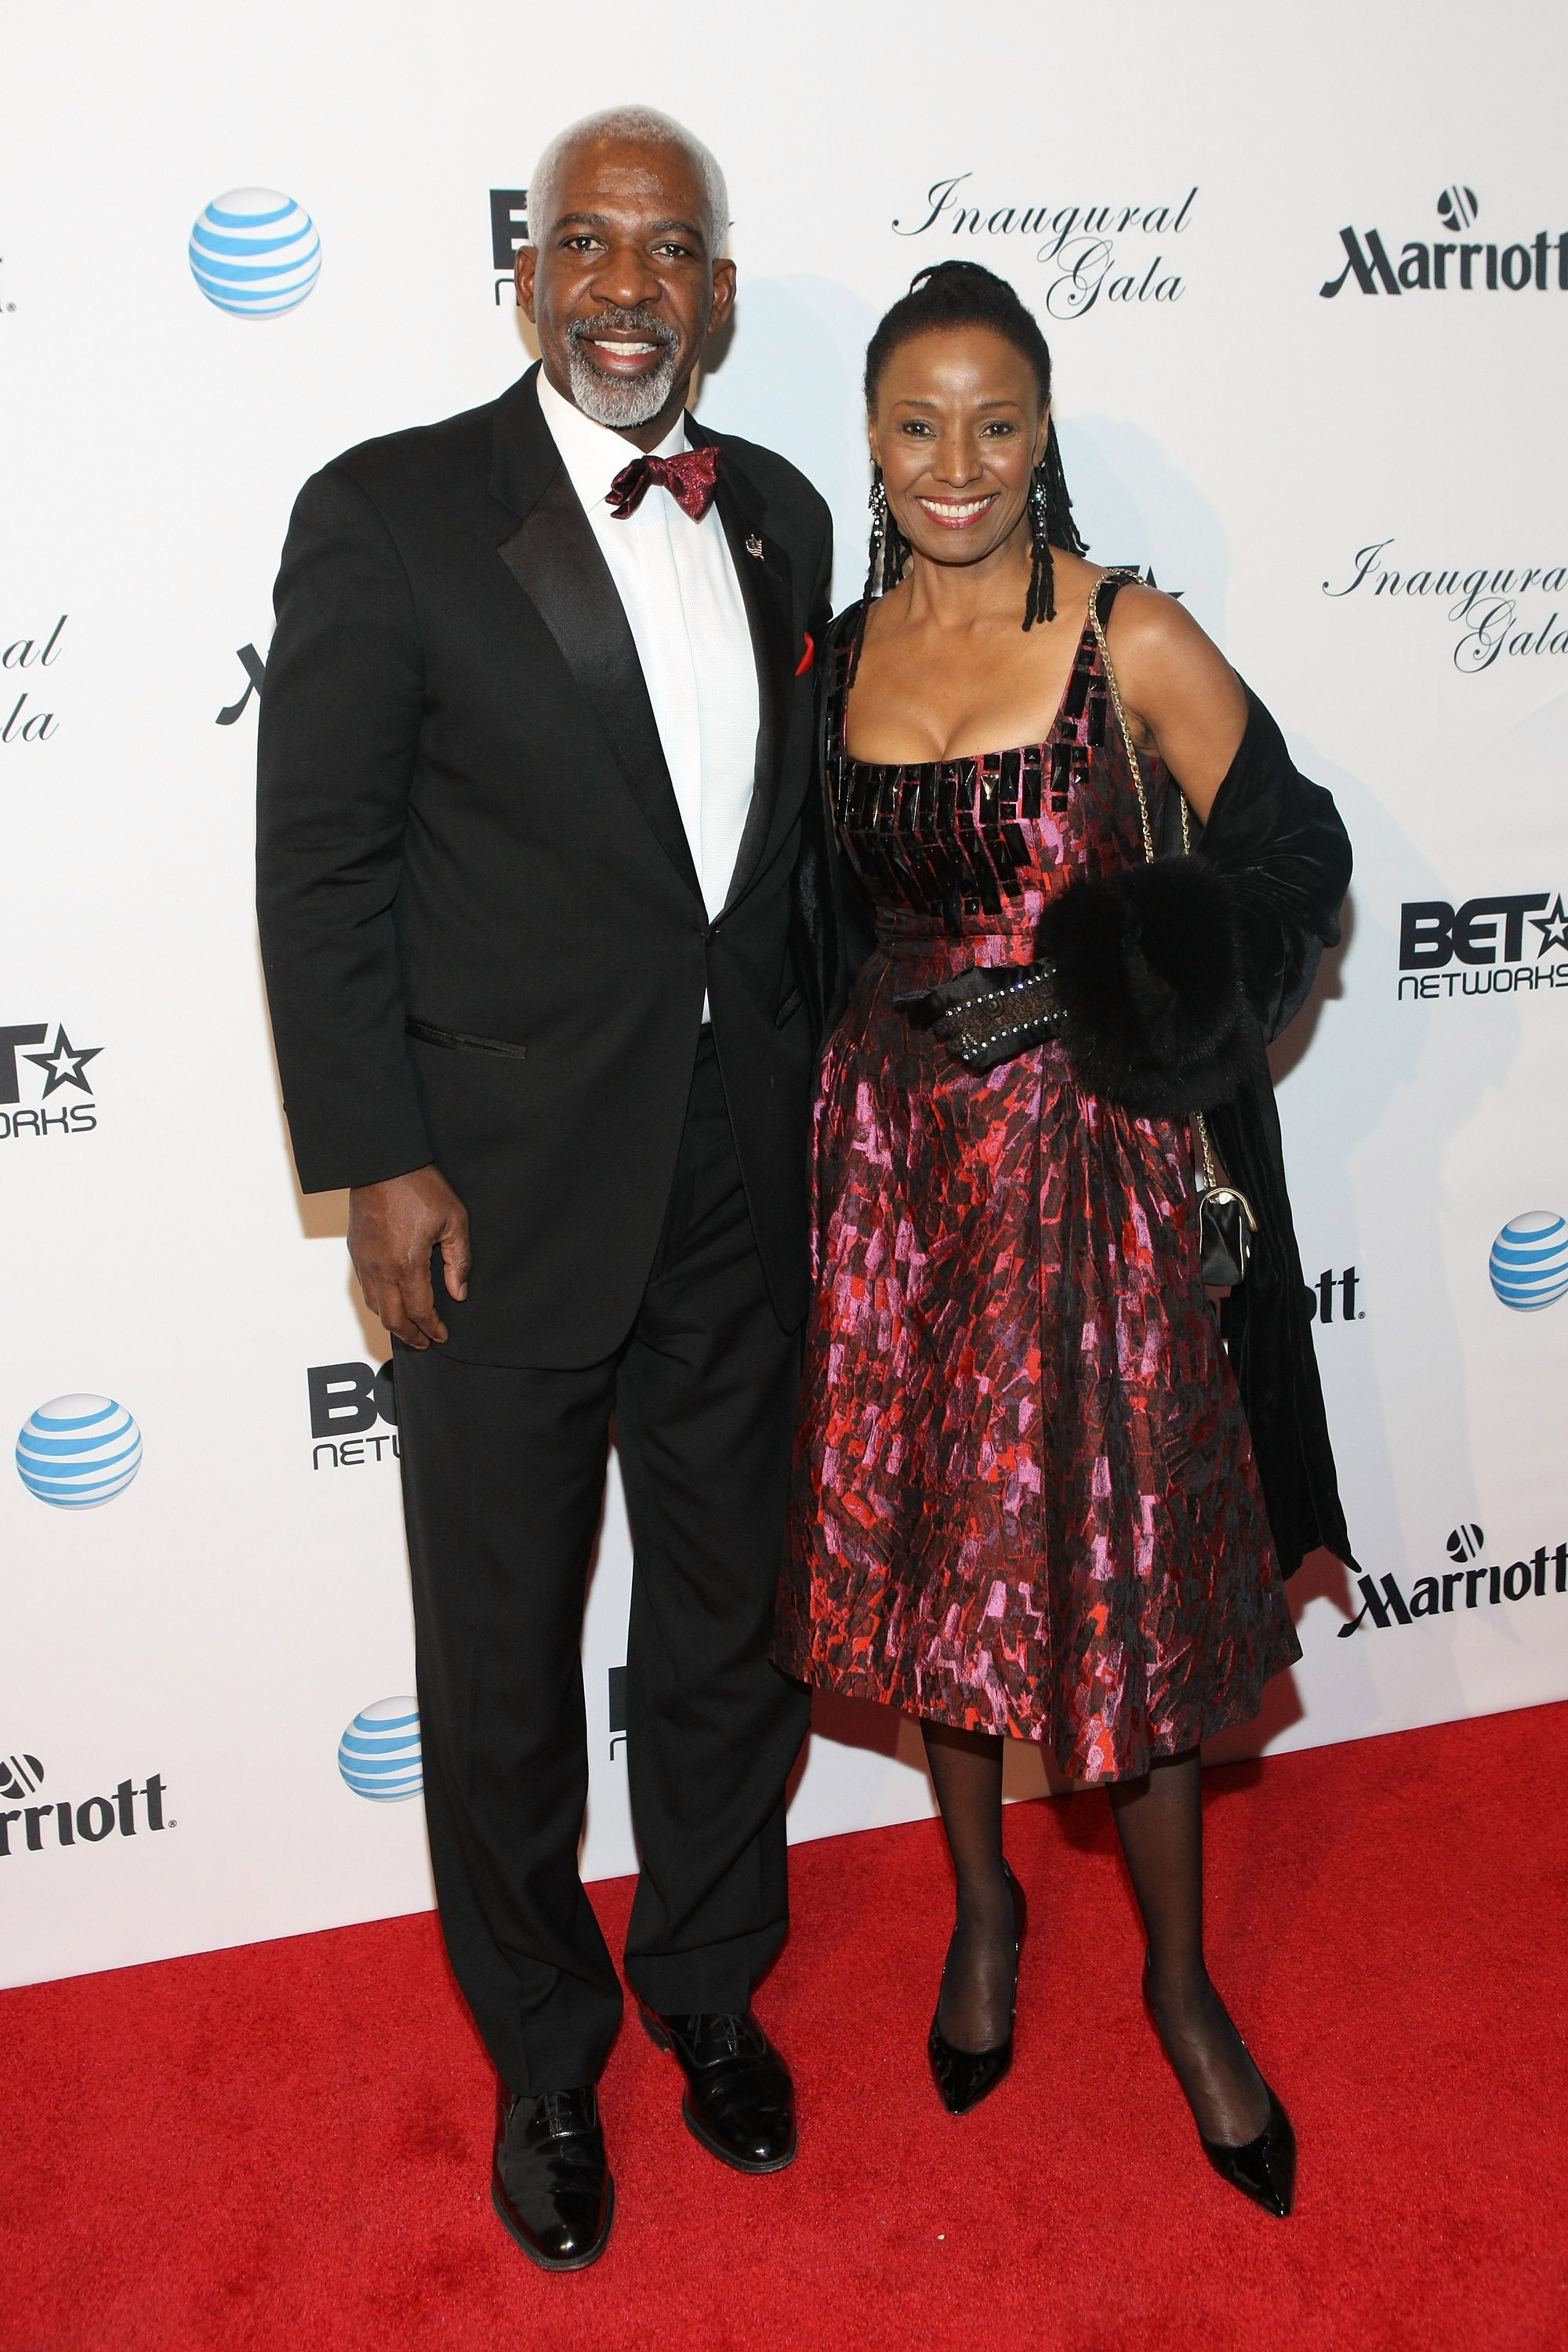 Dan Gasby and B. Smith at the Inaugural Ball hosted by BET Networks  in 2013 | Getty Images